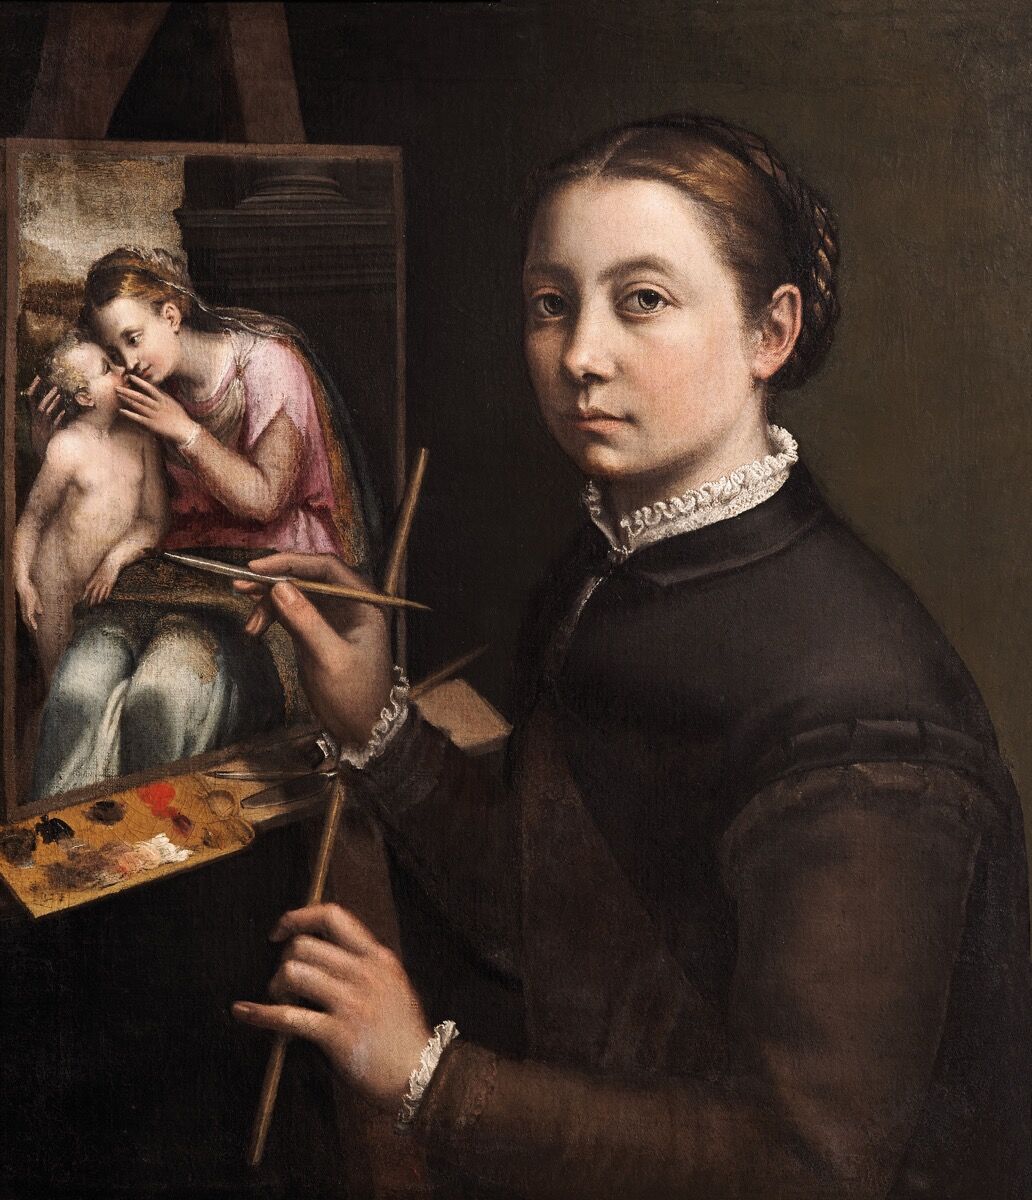 Sofonisba Anguissola, Self-Portrait at the Easel, c. 1556–57. Courtesy of the Museo del Prado.